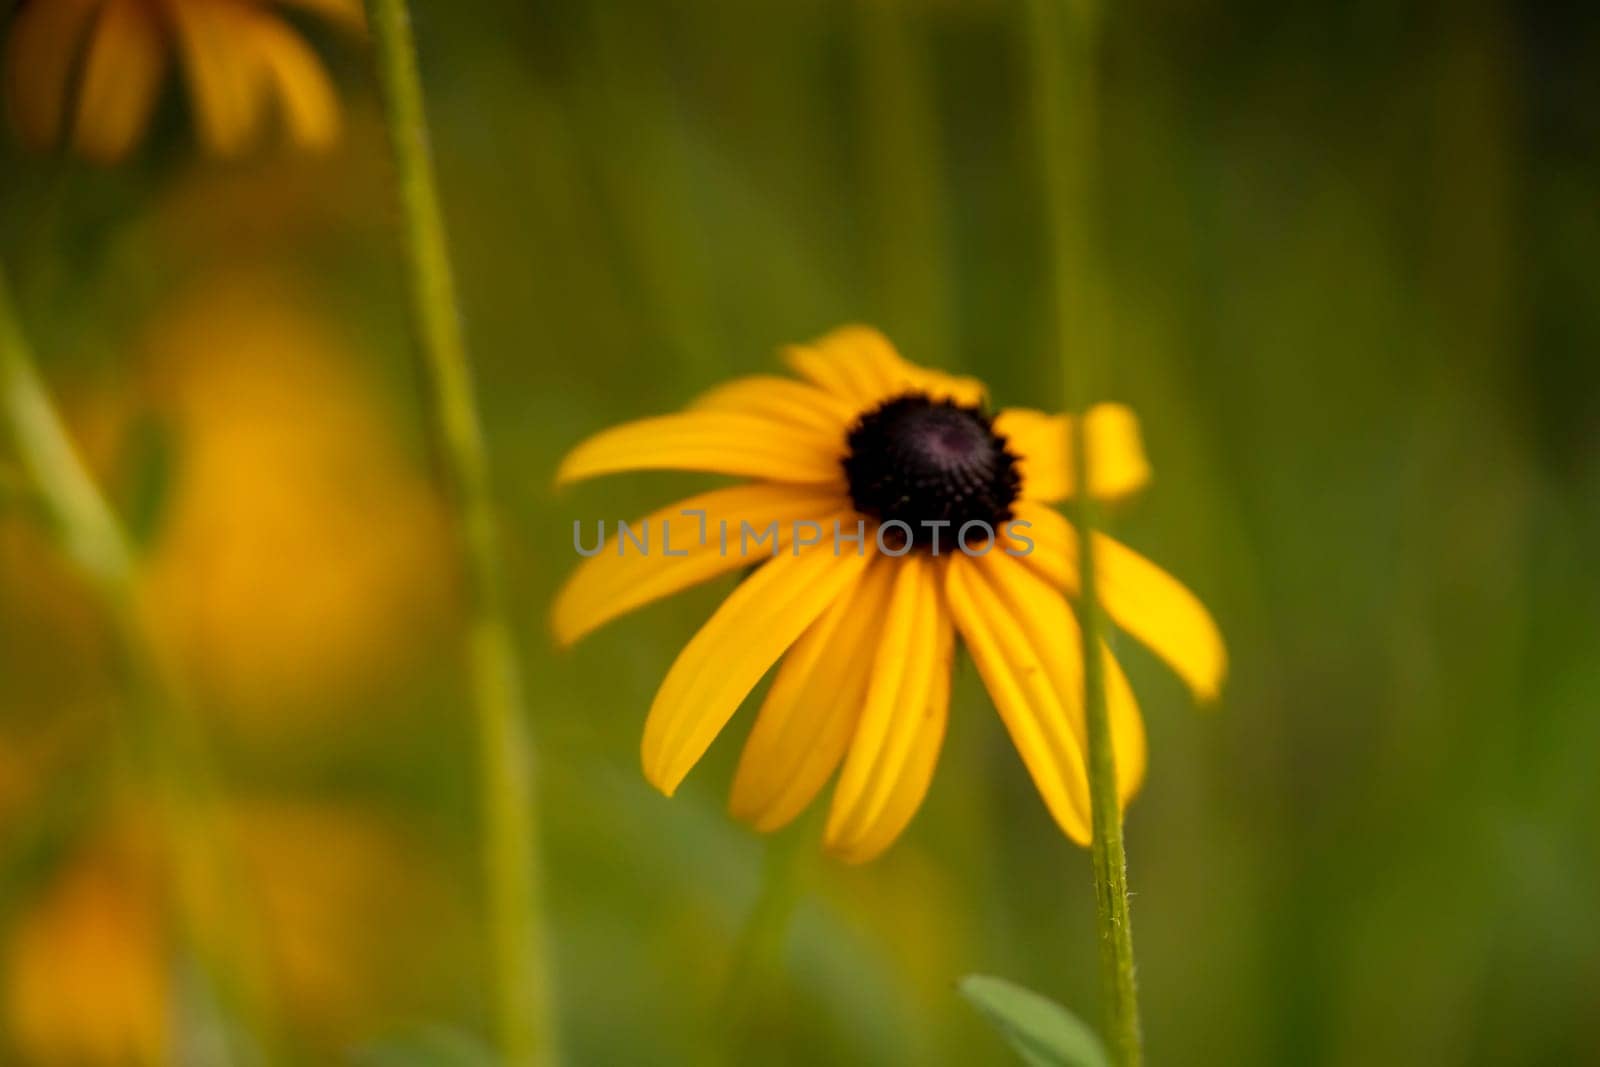 Florist cultivates, grows beautiful flowers of orange and yellow colors Rudbeckia fulgida, in his garden, flower close-up.